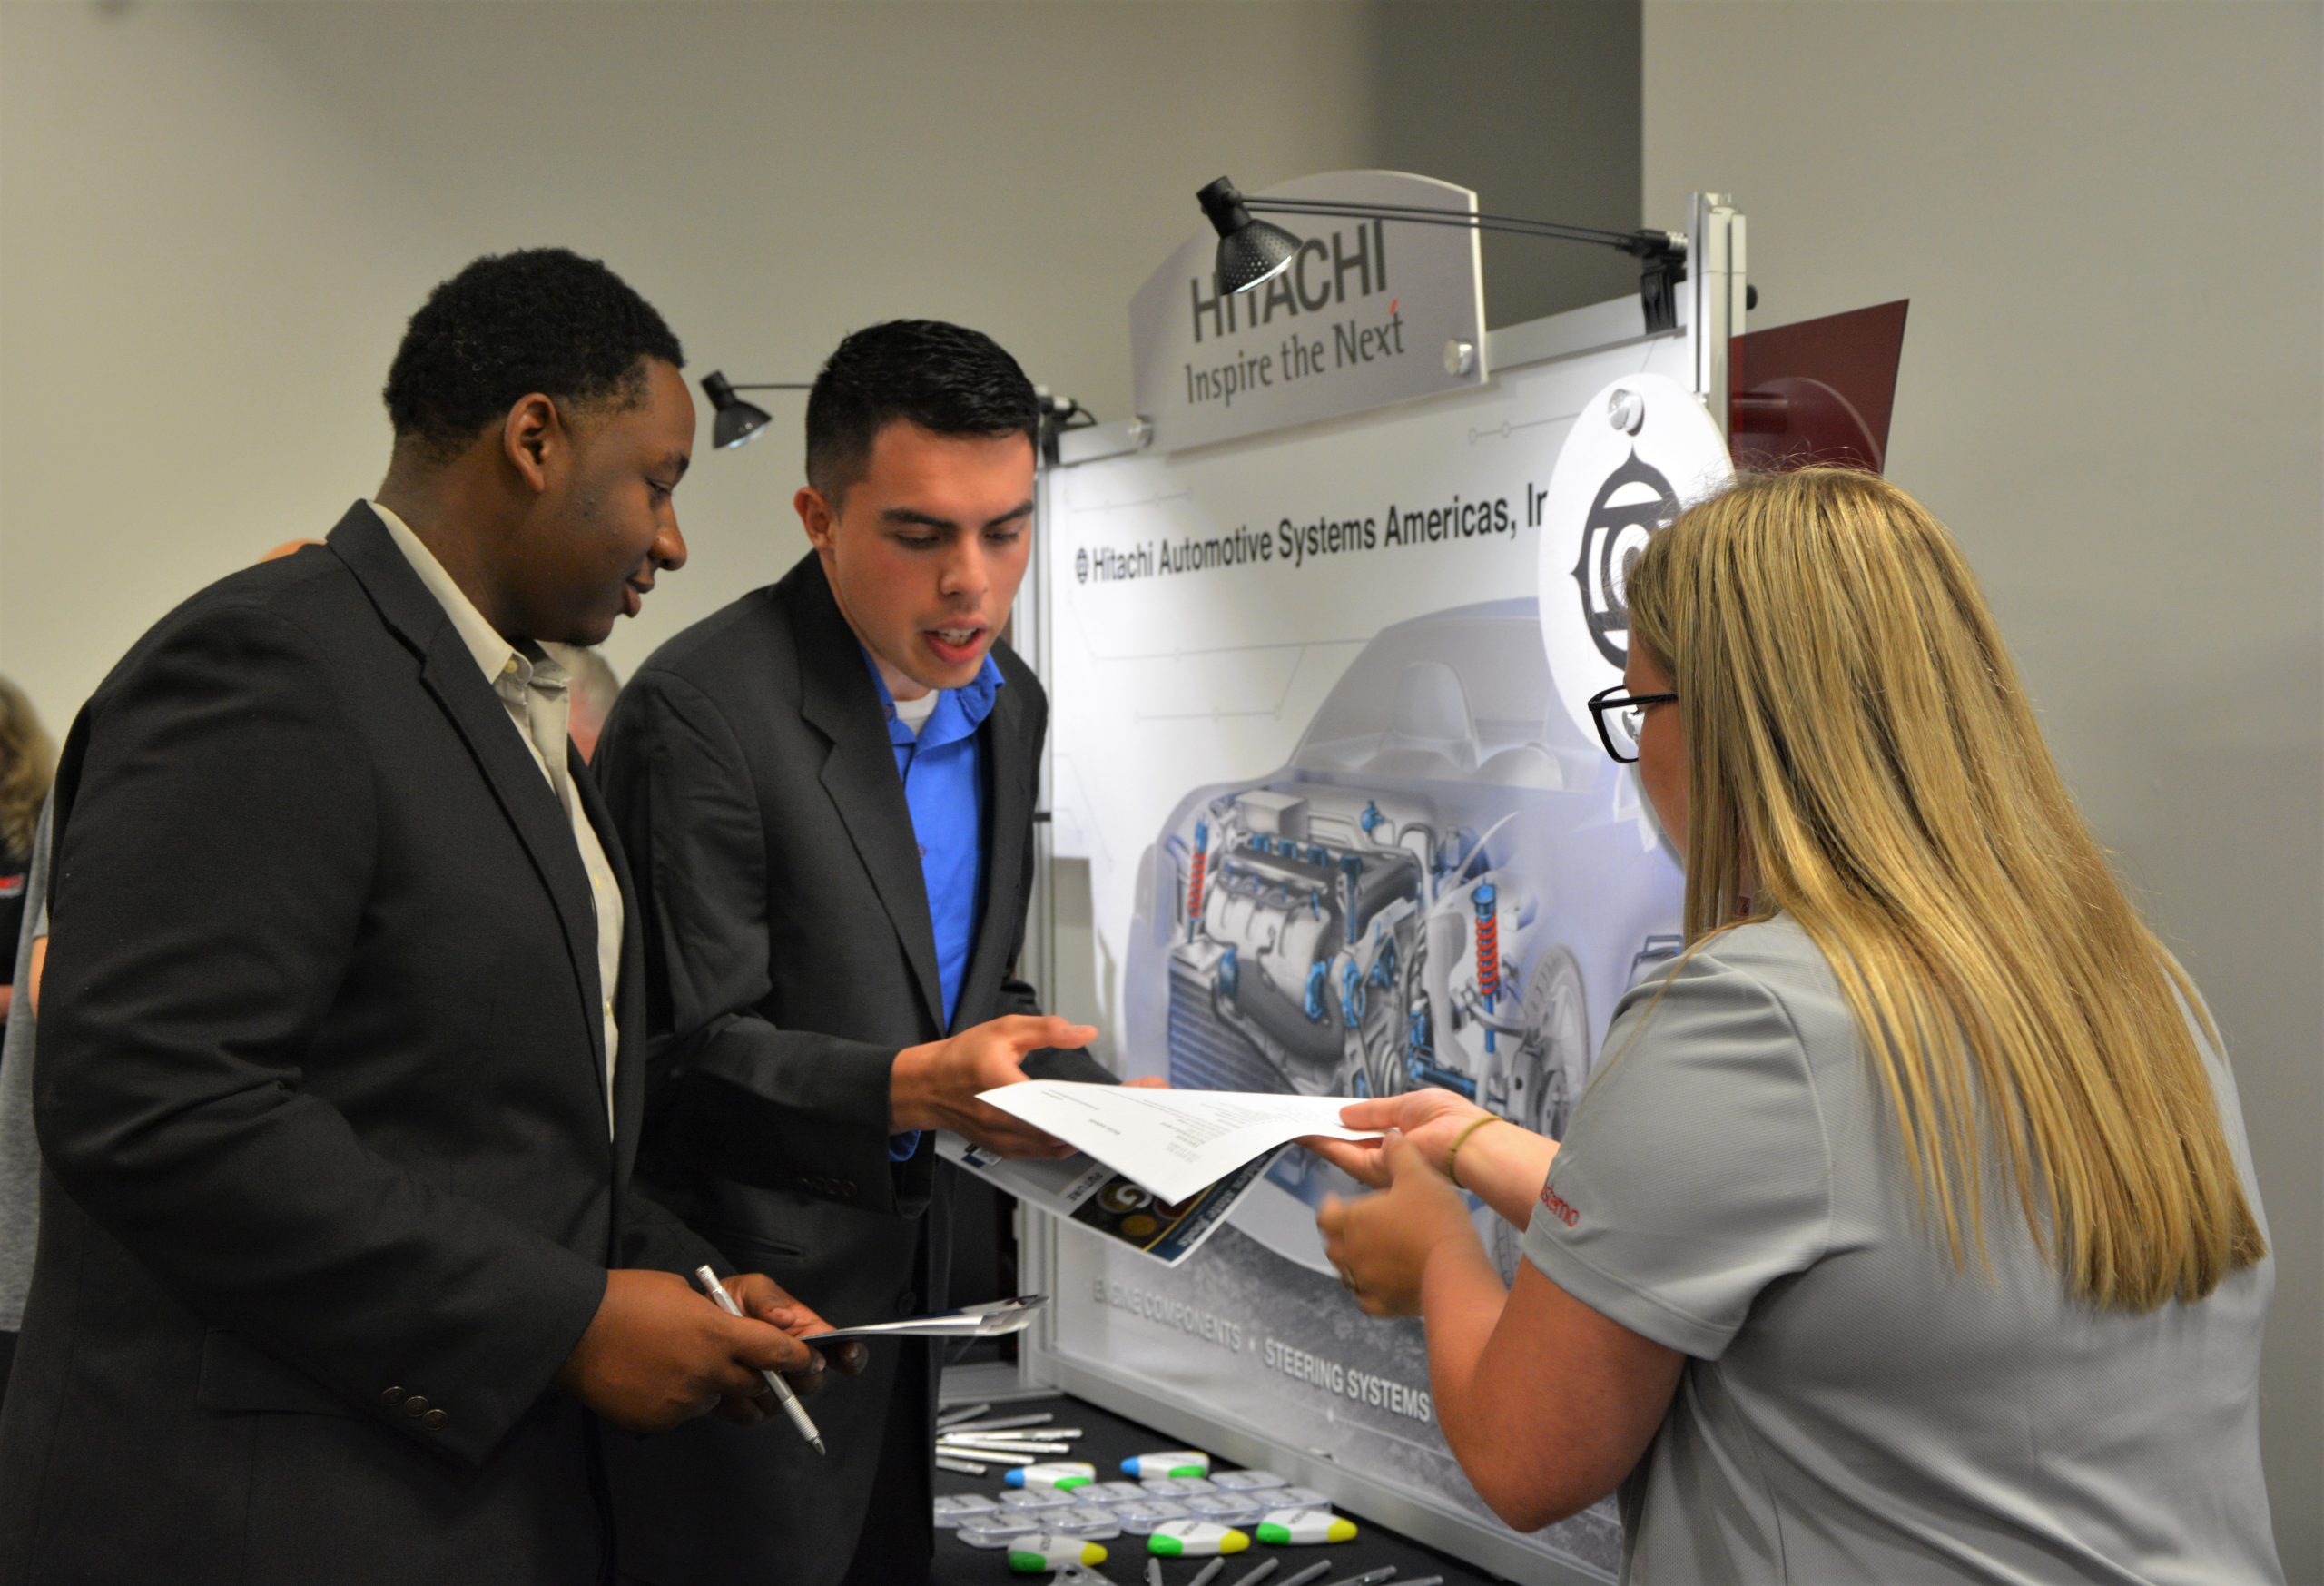 Attendees handing over resumes to potential employer